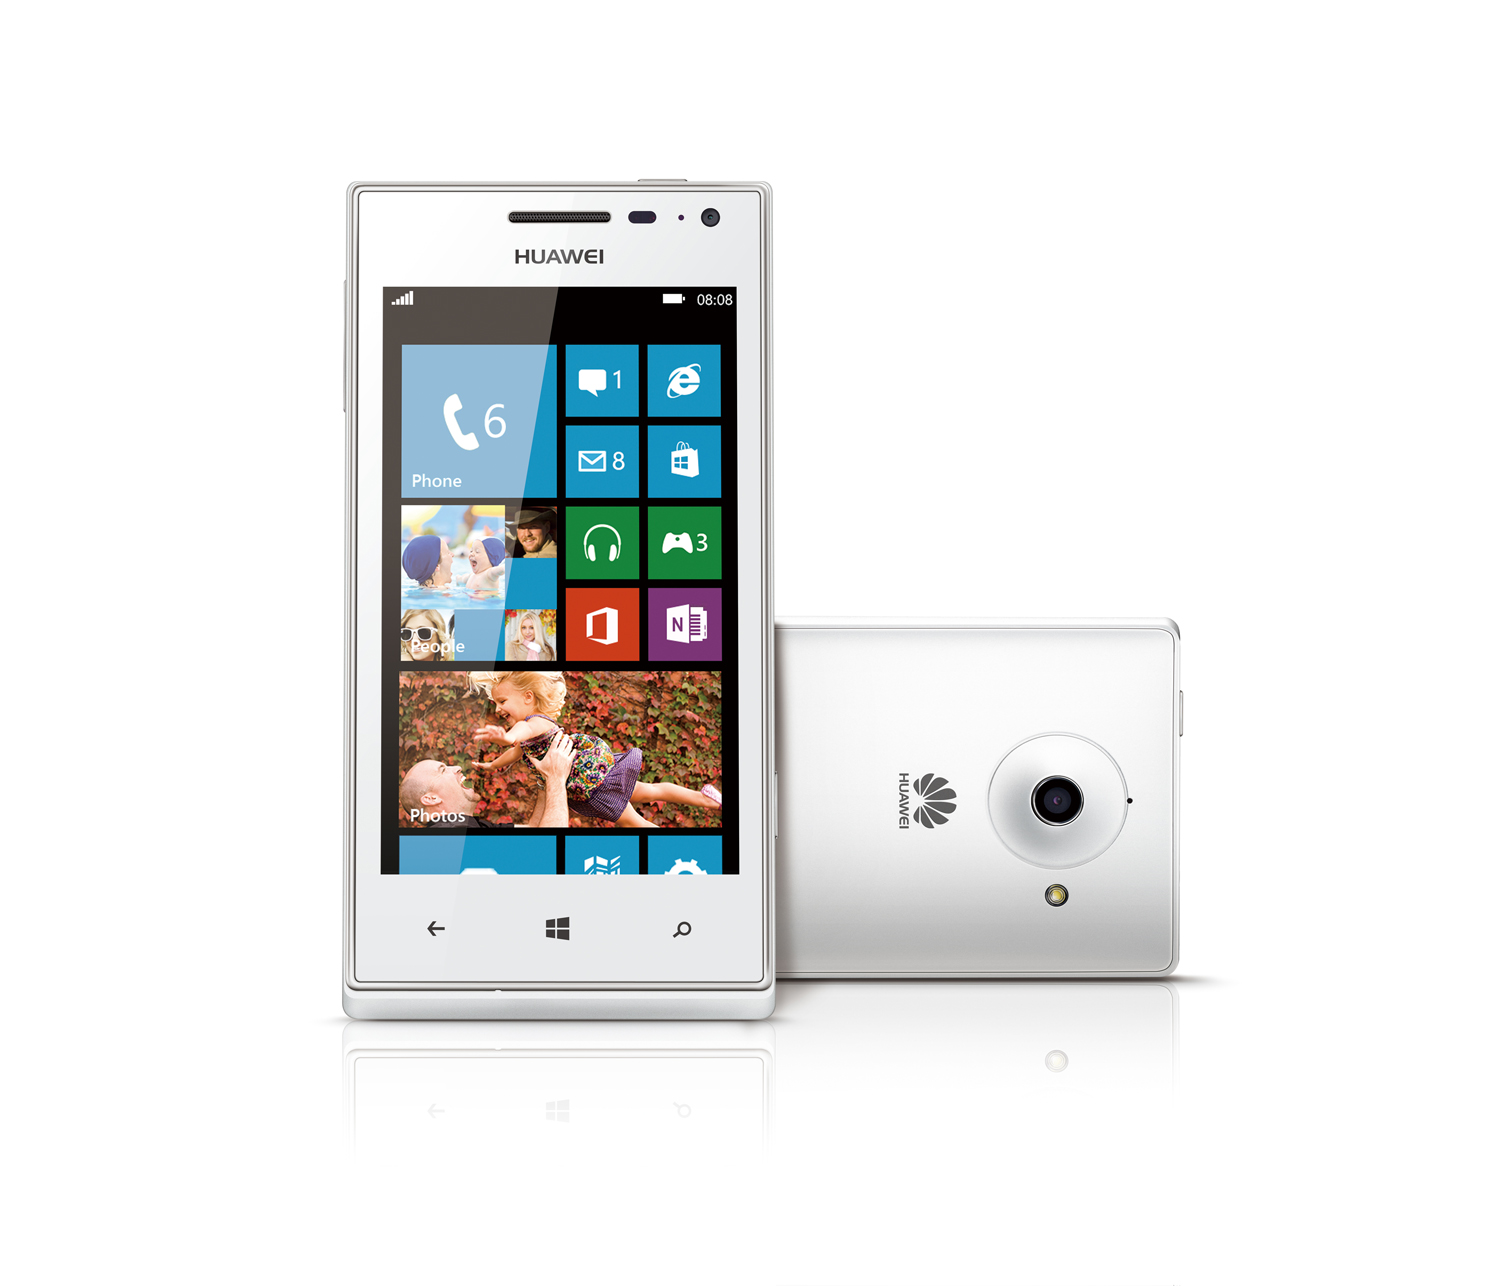 Huawei’s First Windows Phone 8 Is Now Available via Globe